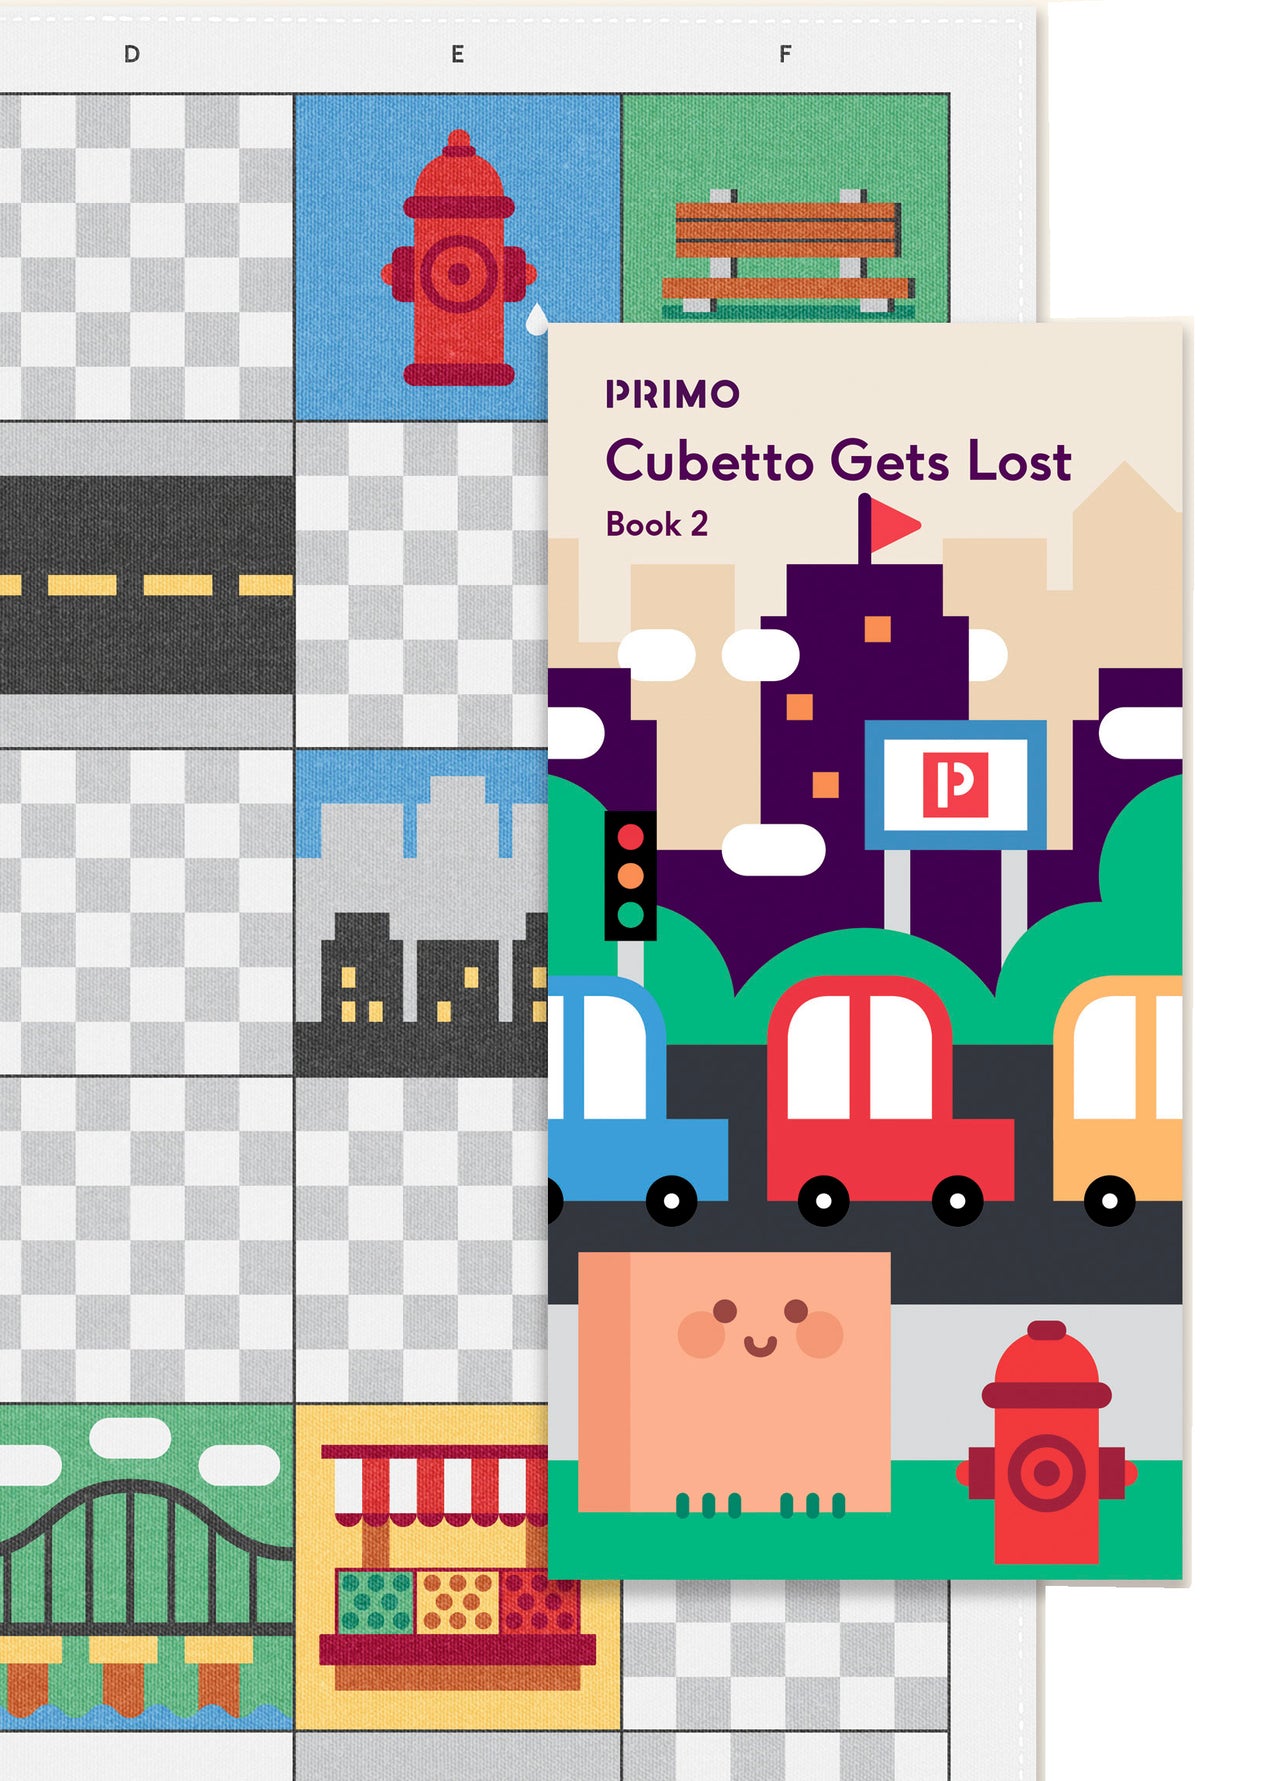 cubetto gets lost - city map and story book